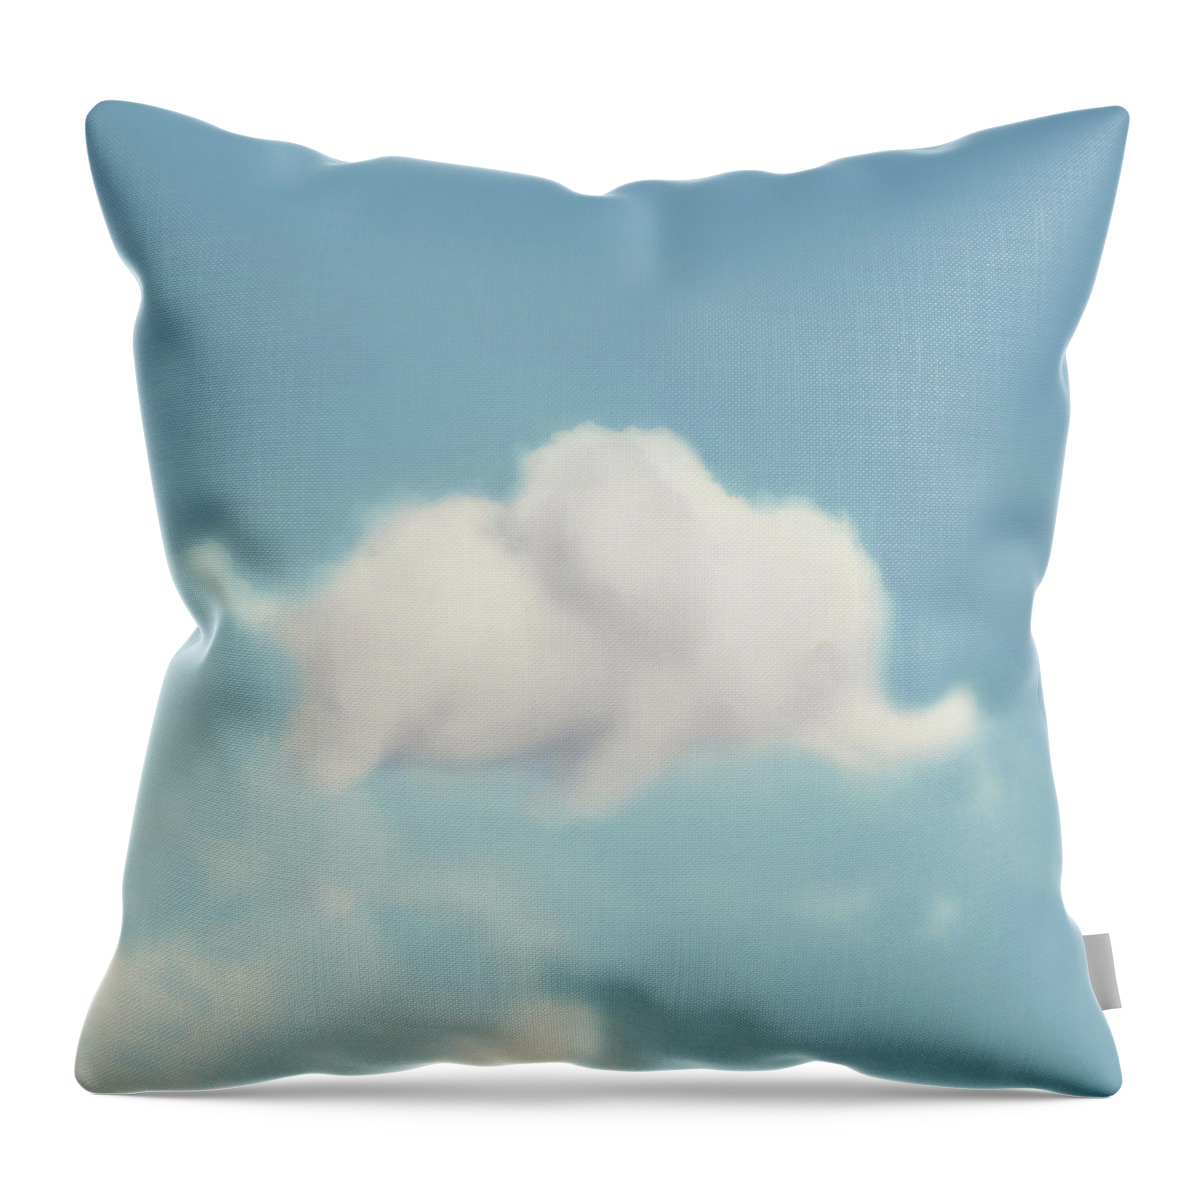 Elephant Art Throw Pillow featuring the photograph Elephant In the Sky - Square Format by Amy Tyler